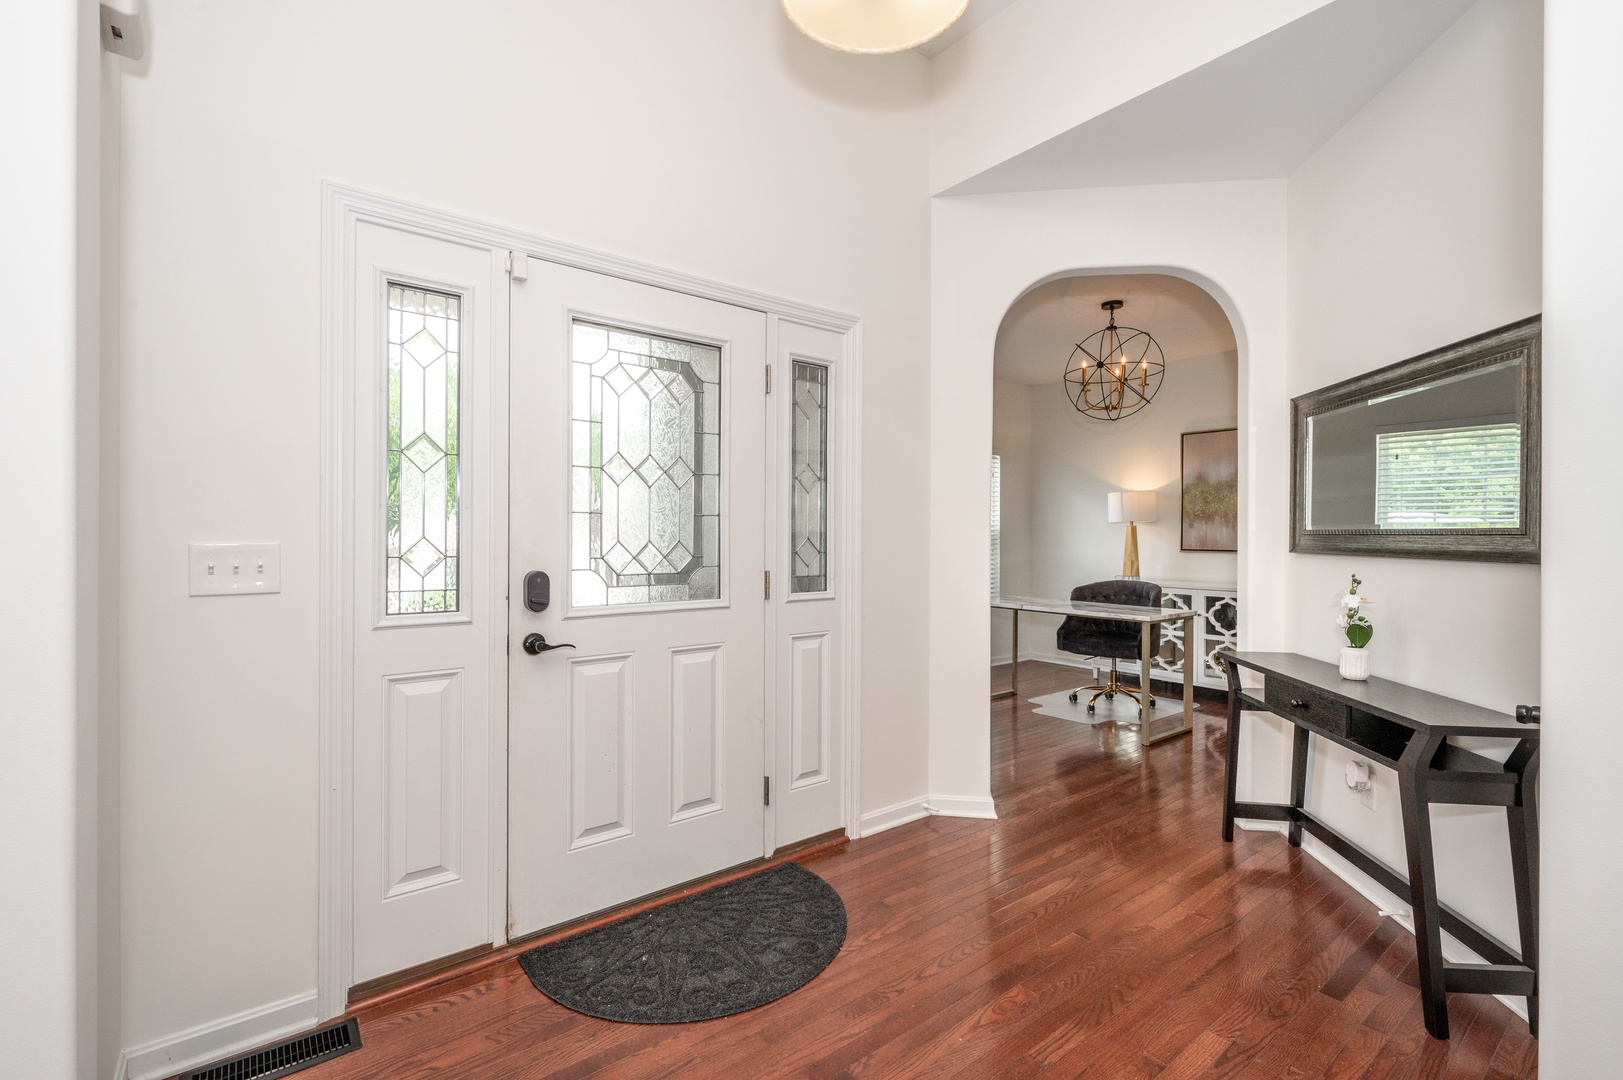 A spacious, airy entryway will welcome you home